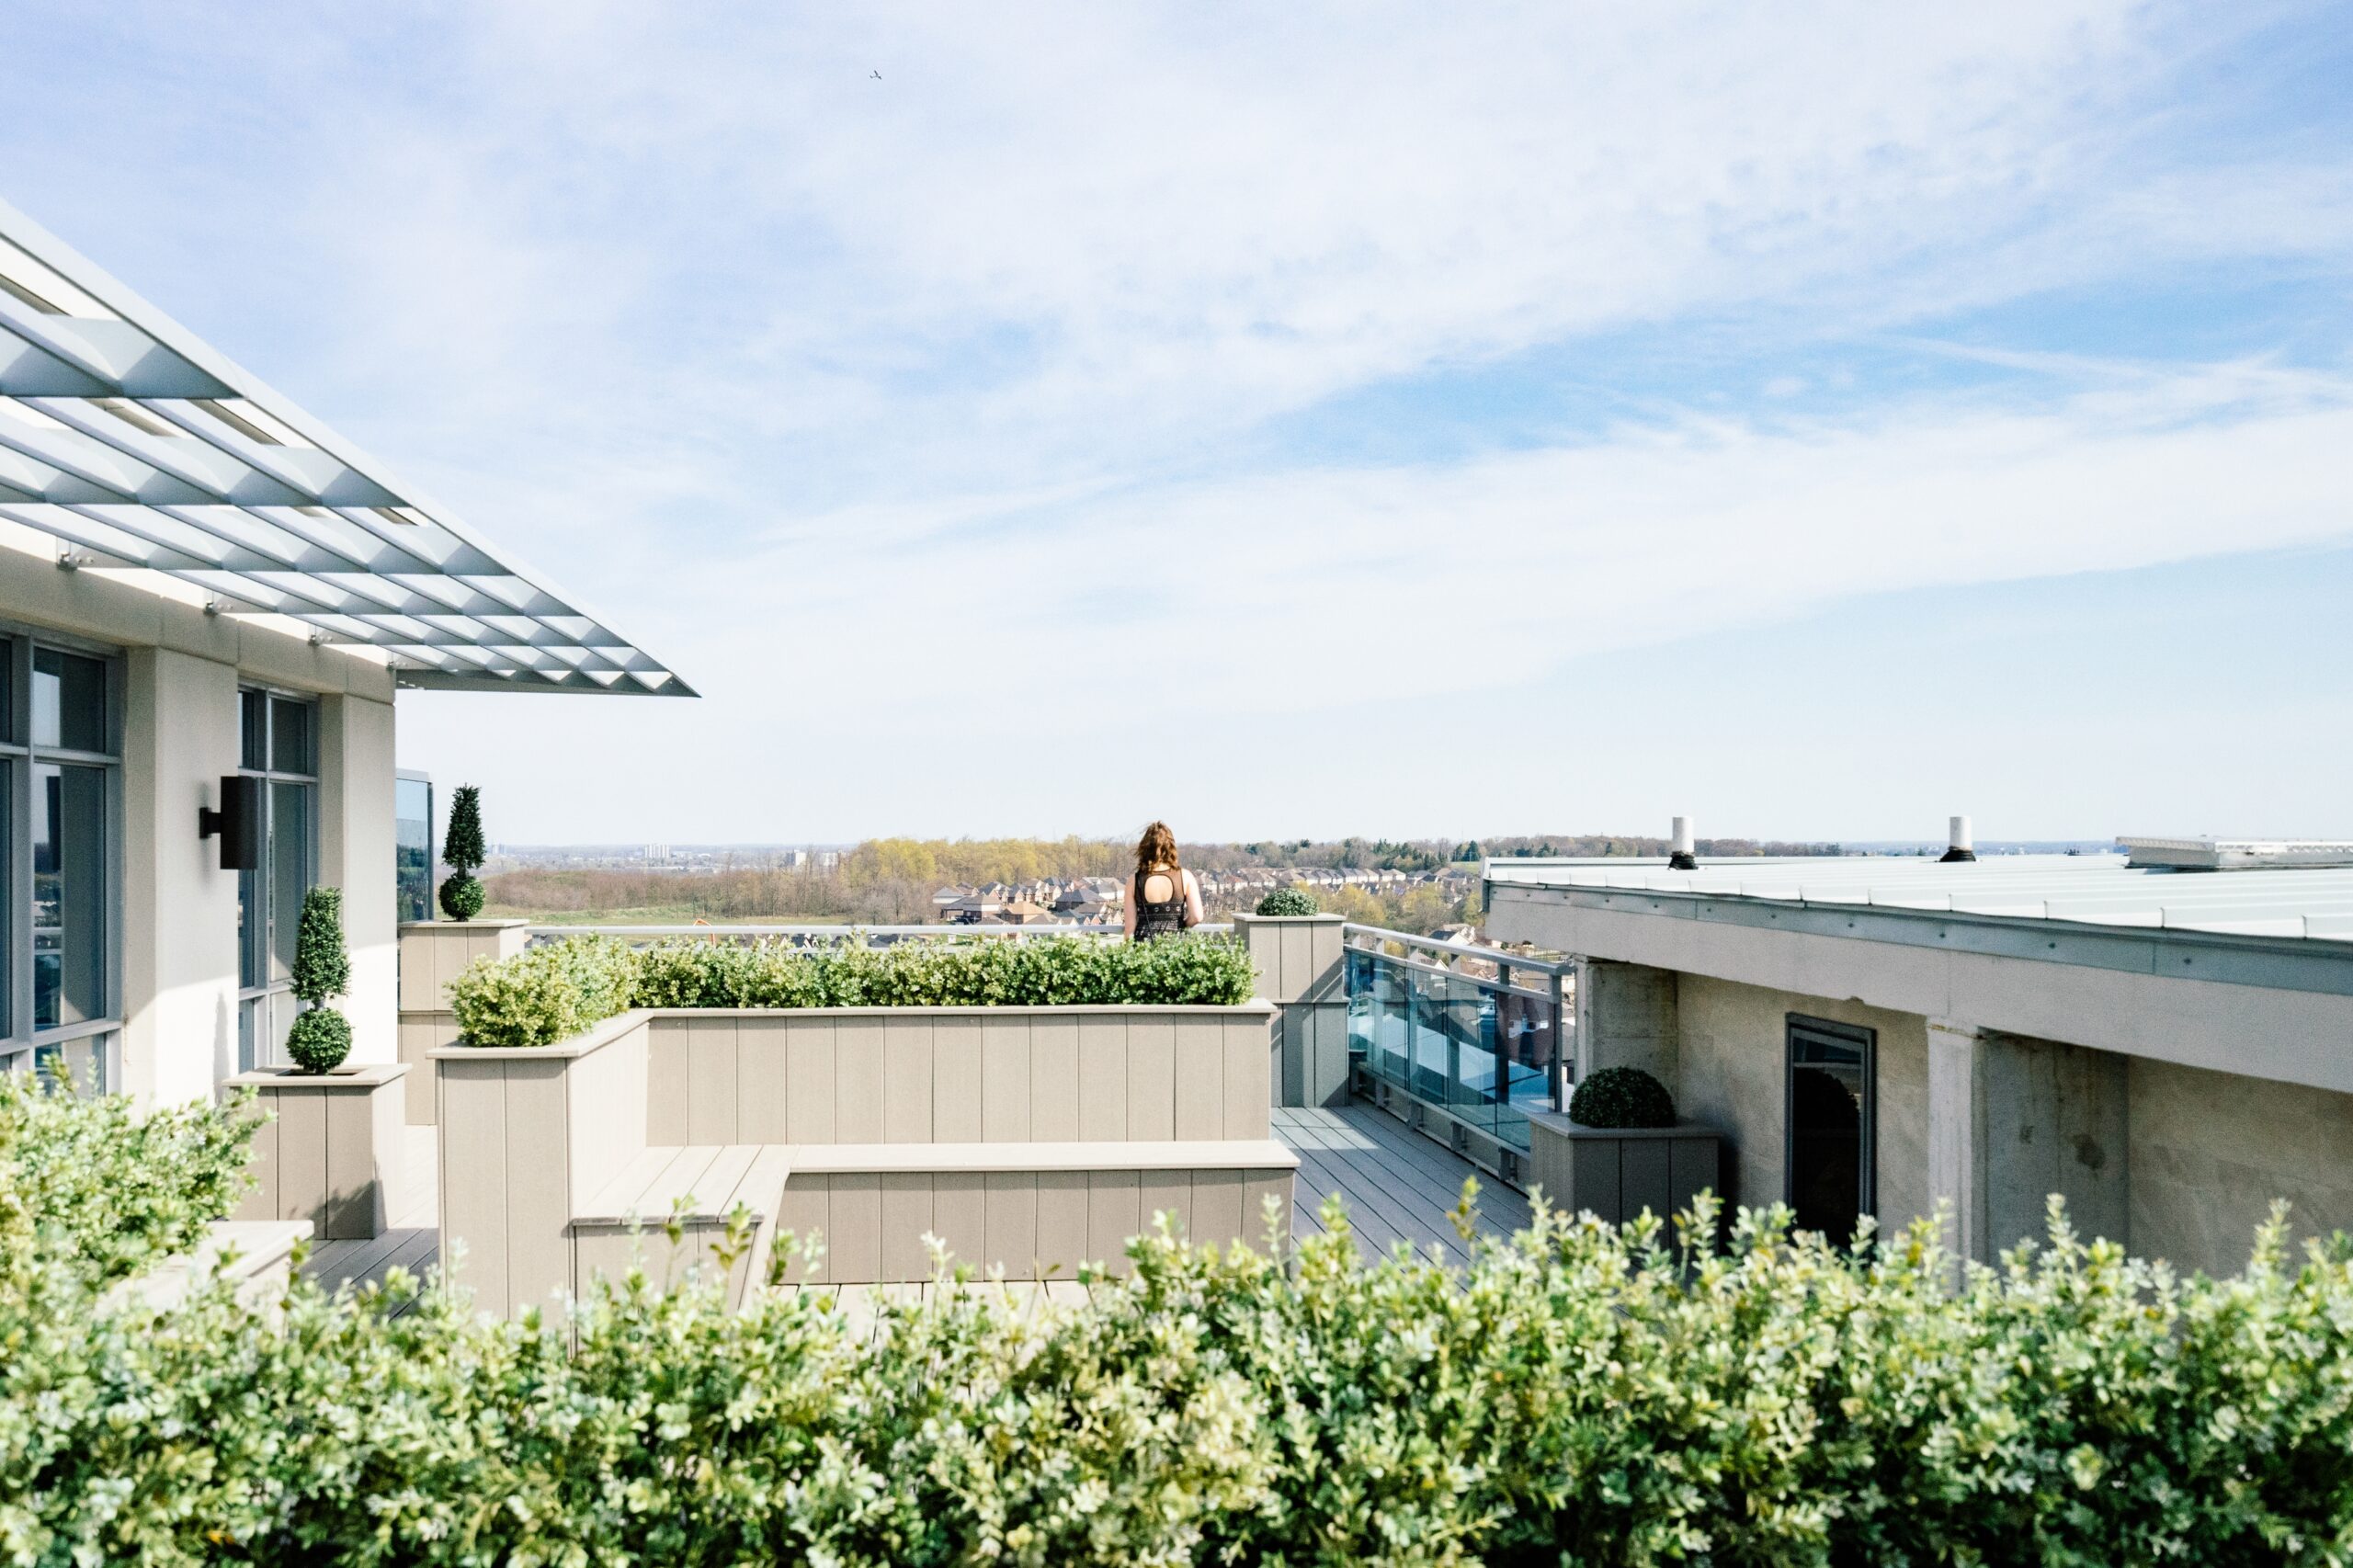 The Advantages of Installing Elevated Roof Deck Systems